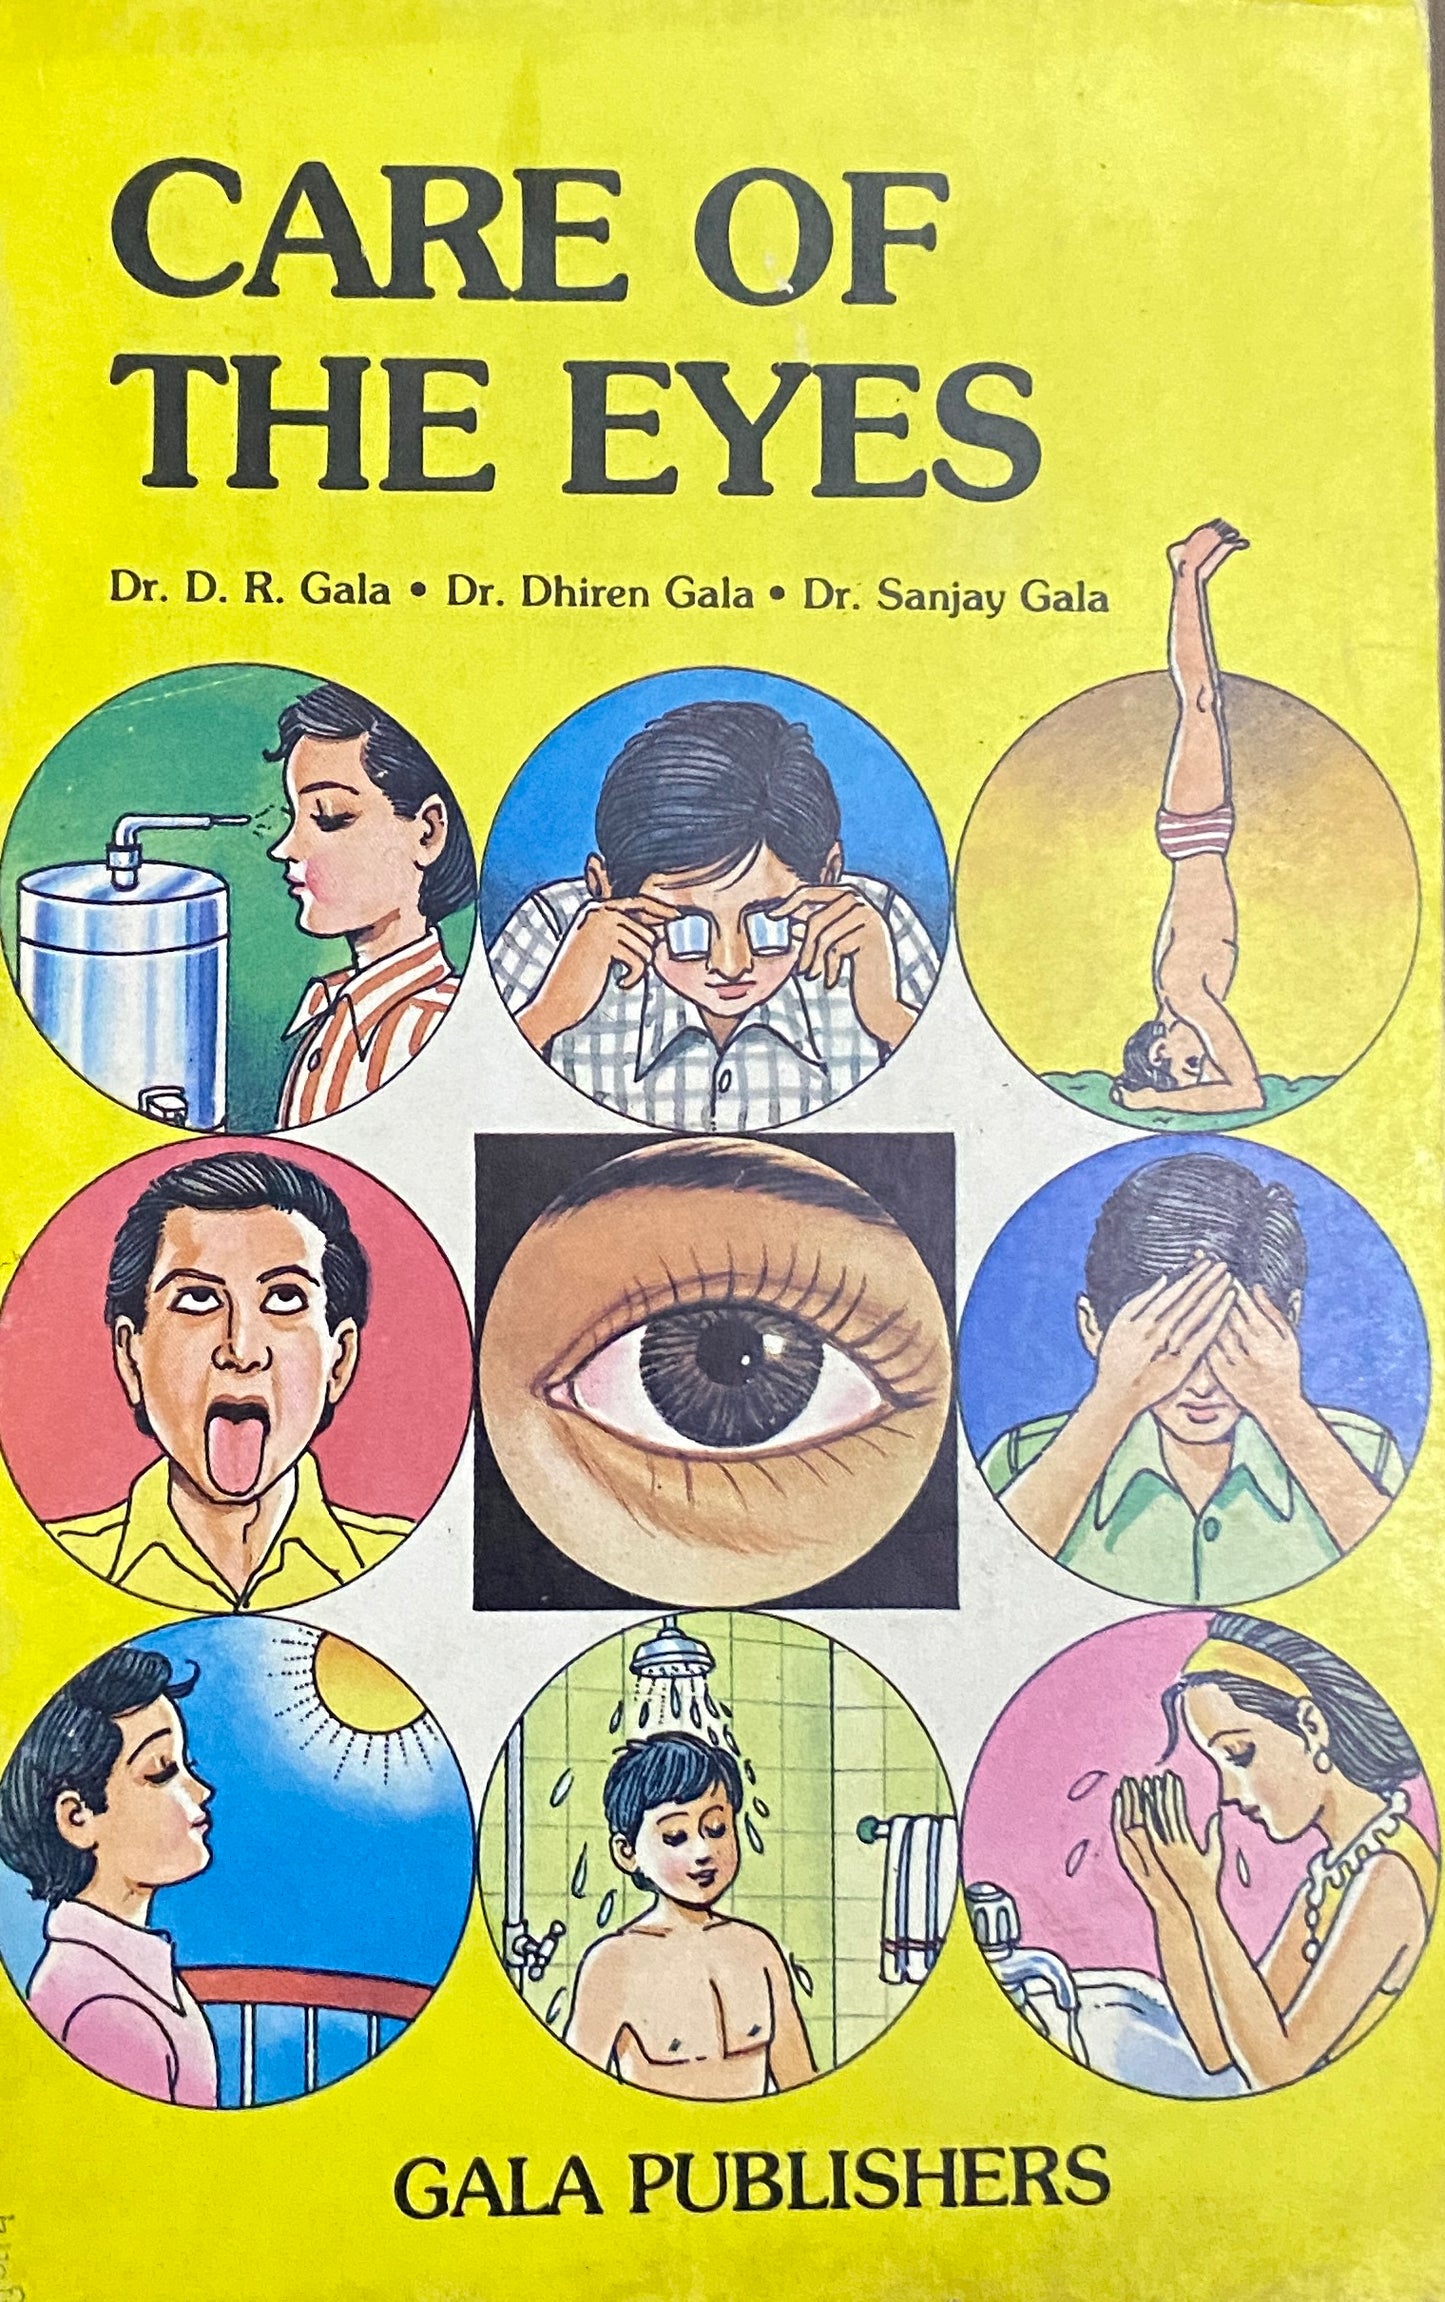 Care of the Eyes by Dr D R Gala